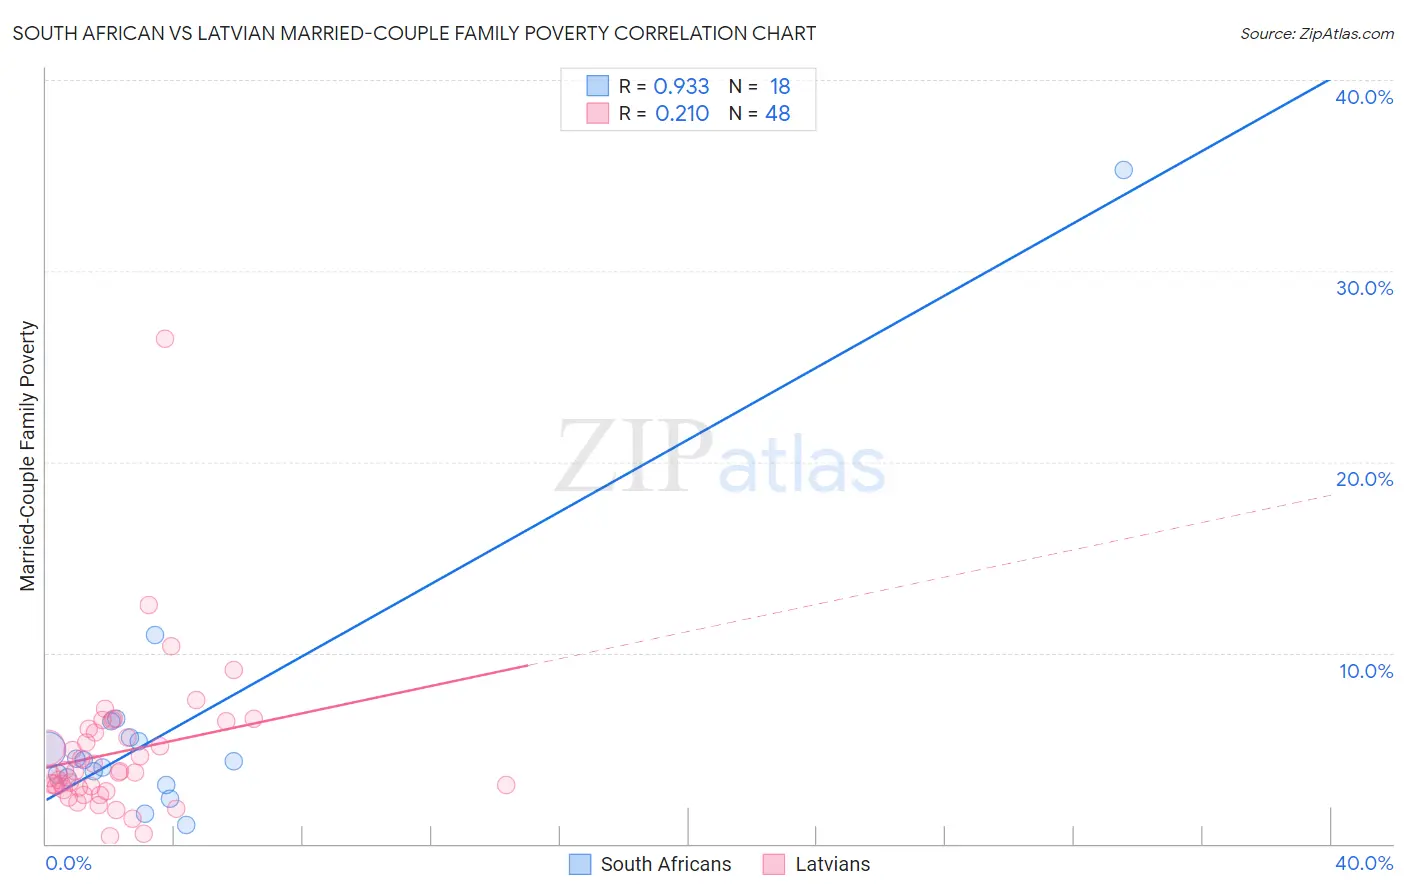 South African vs Latvian Married-Couple Family Poverty